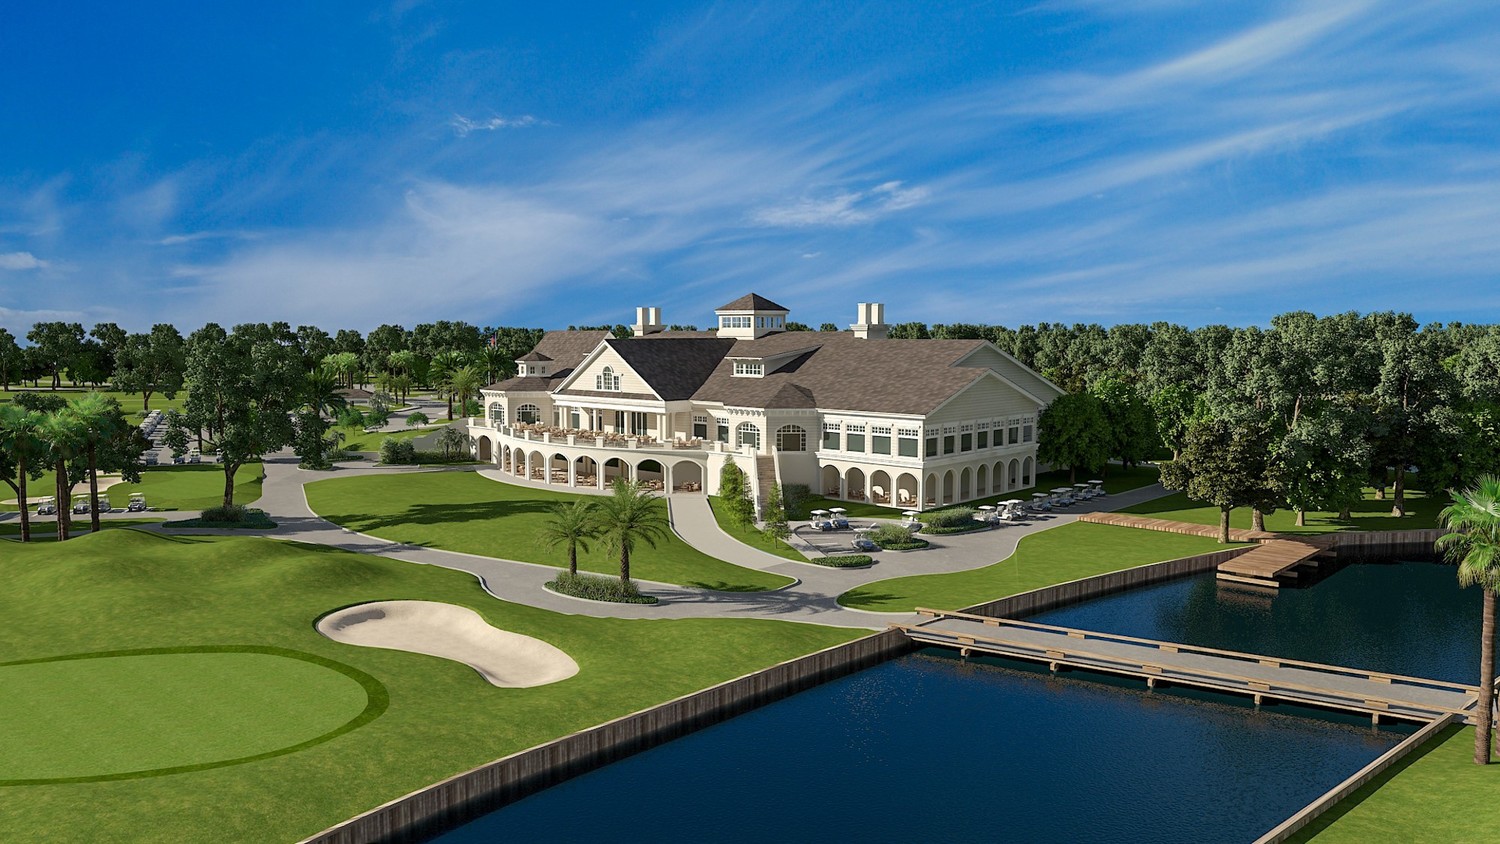 The new clubhouse will be in the same area as the current building, but its orientation will be slightly shifted to take advantage of the area’s water and golf course vistas.